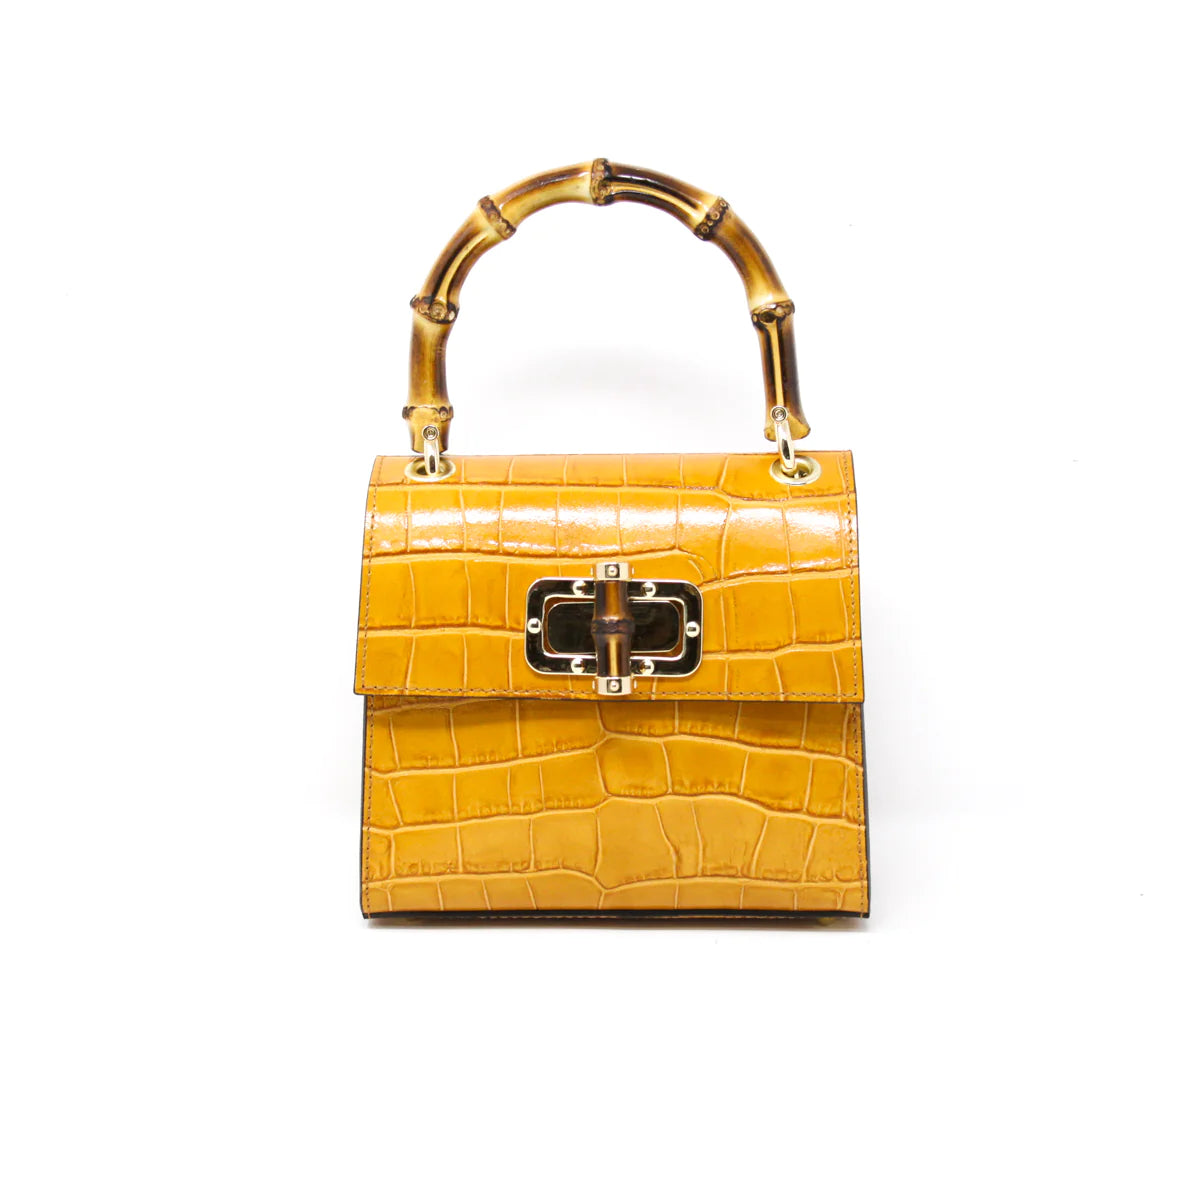 Camel leather bag with bamboo handle